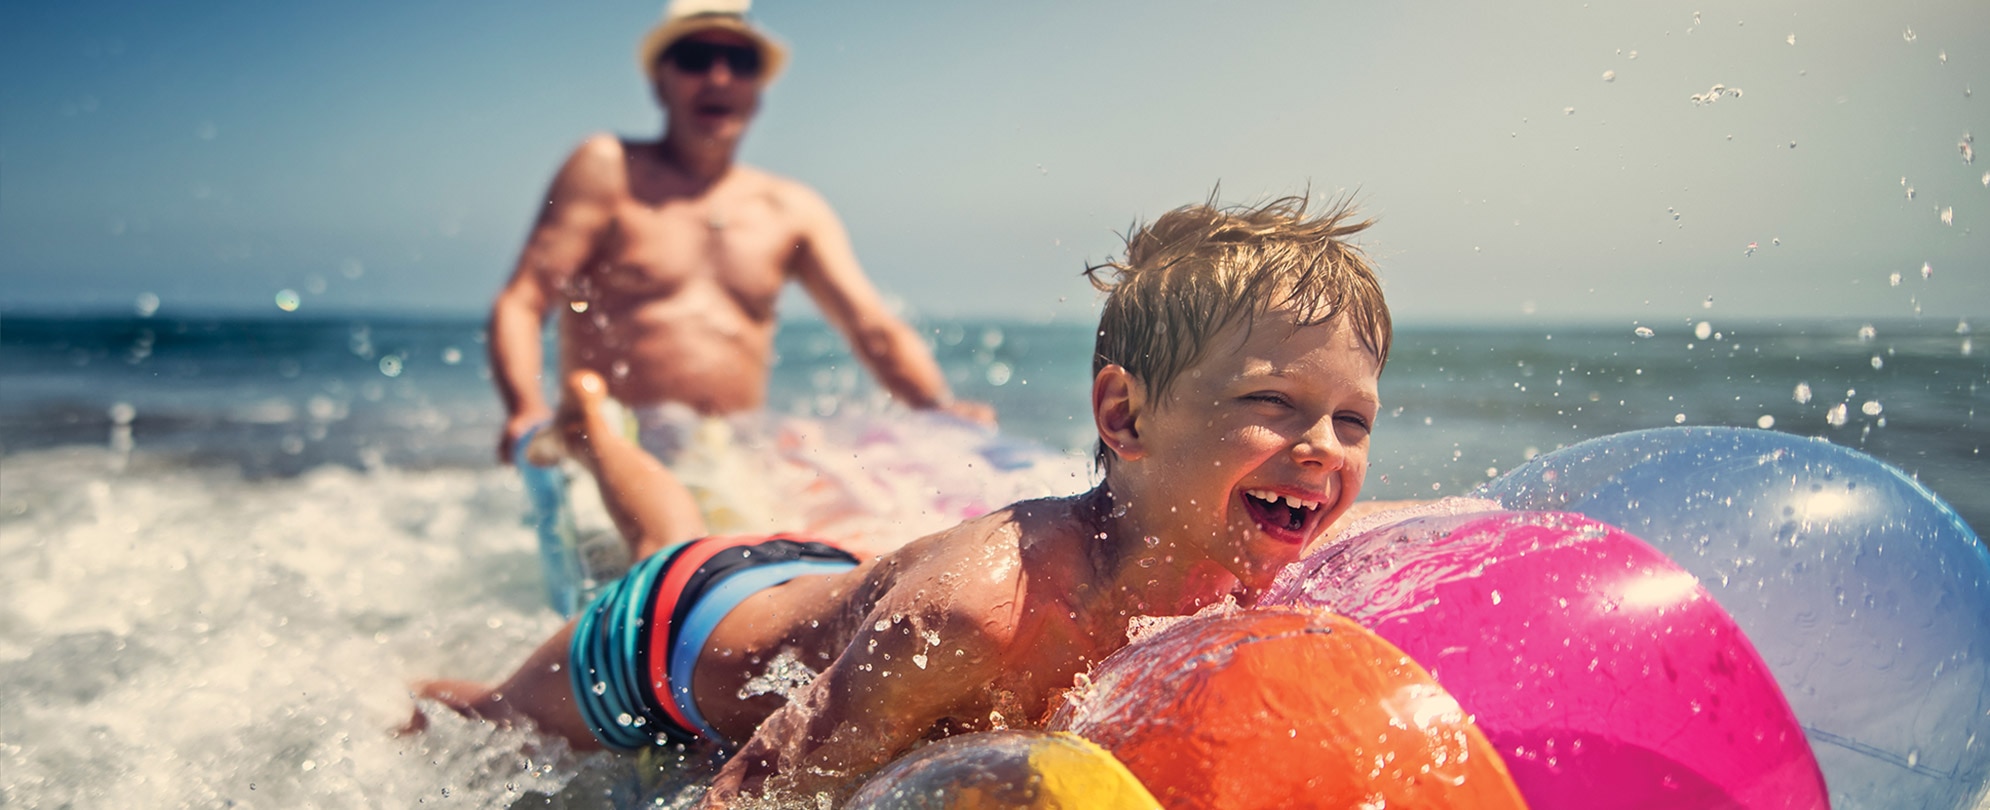 A smiling young boy splashes through the water on a colorful inflatable raft with his grandpa standing behind him.